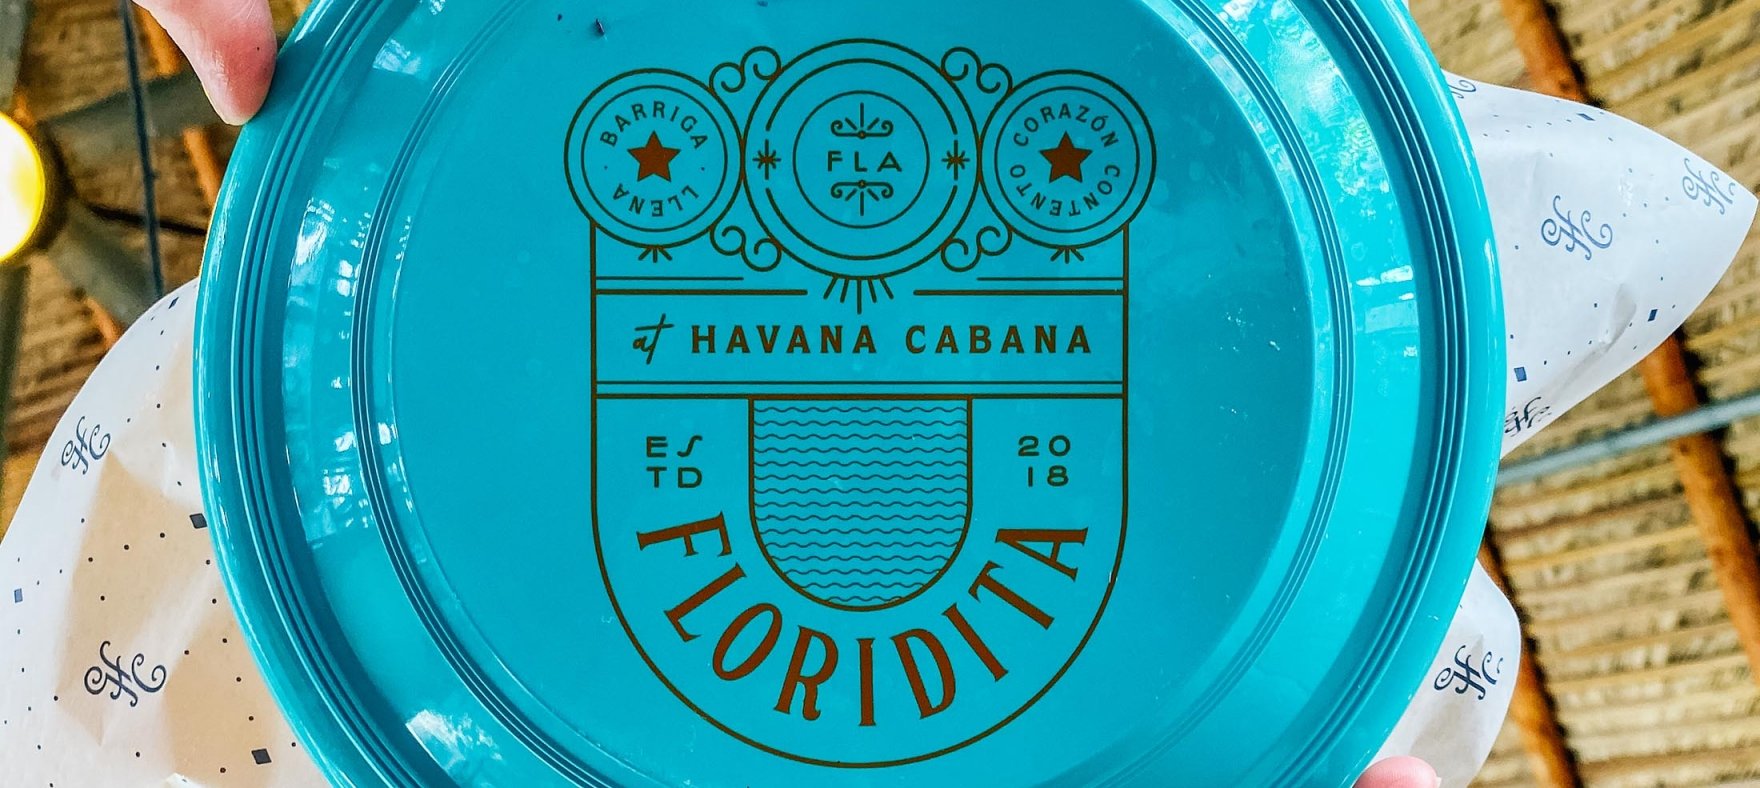 A low angle shot of the Havana Cabana Floridita logo on a plate raised by a pair of hands